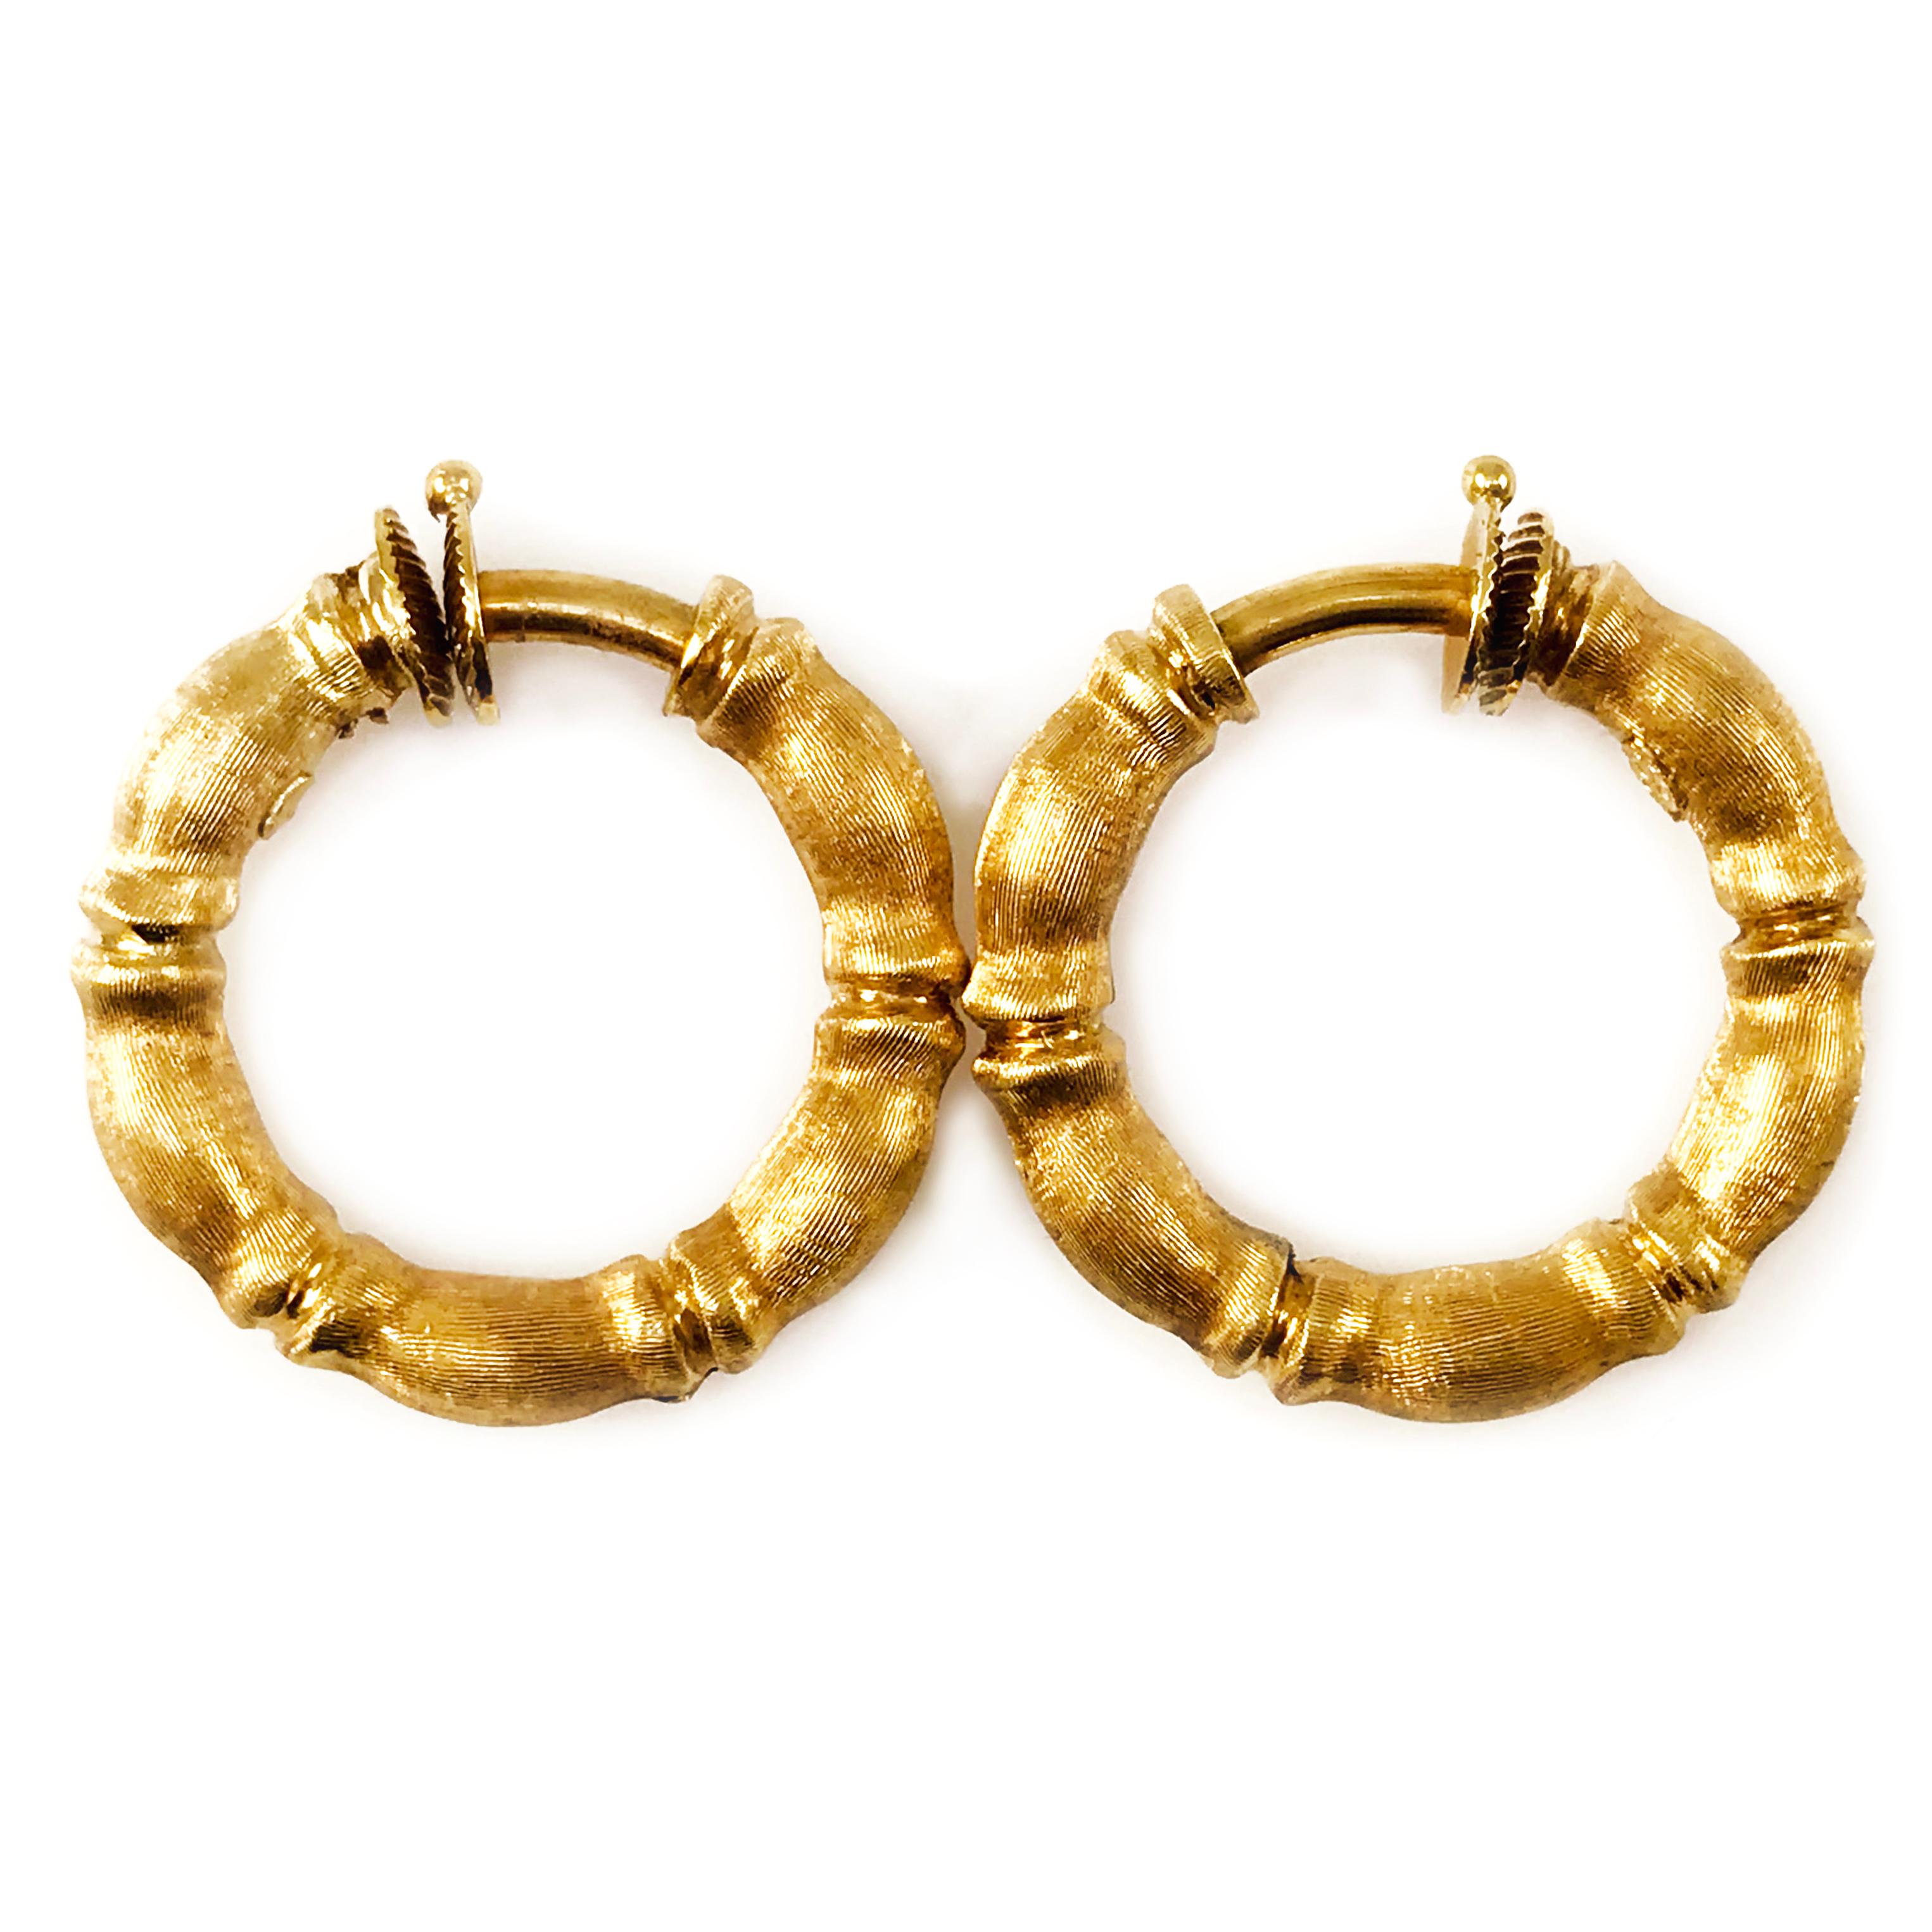 Solid 18 Karat Bamboo Gold Hoop Earrings with a brushed satin finish. These unique earrings are not for pierced ears as they have no post and springs closure clip. The total gold weight of these earrings is 13.8 grams.